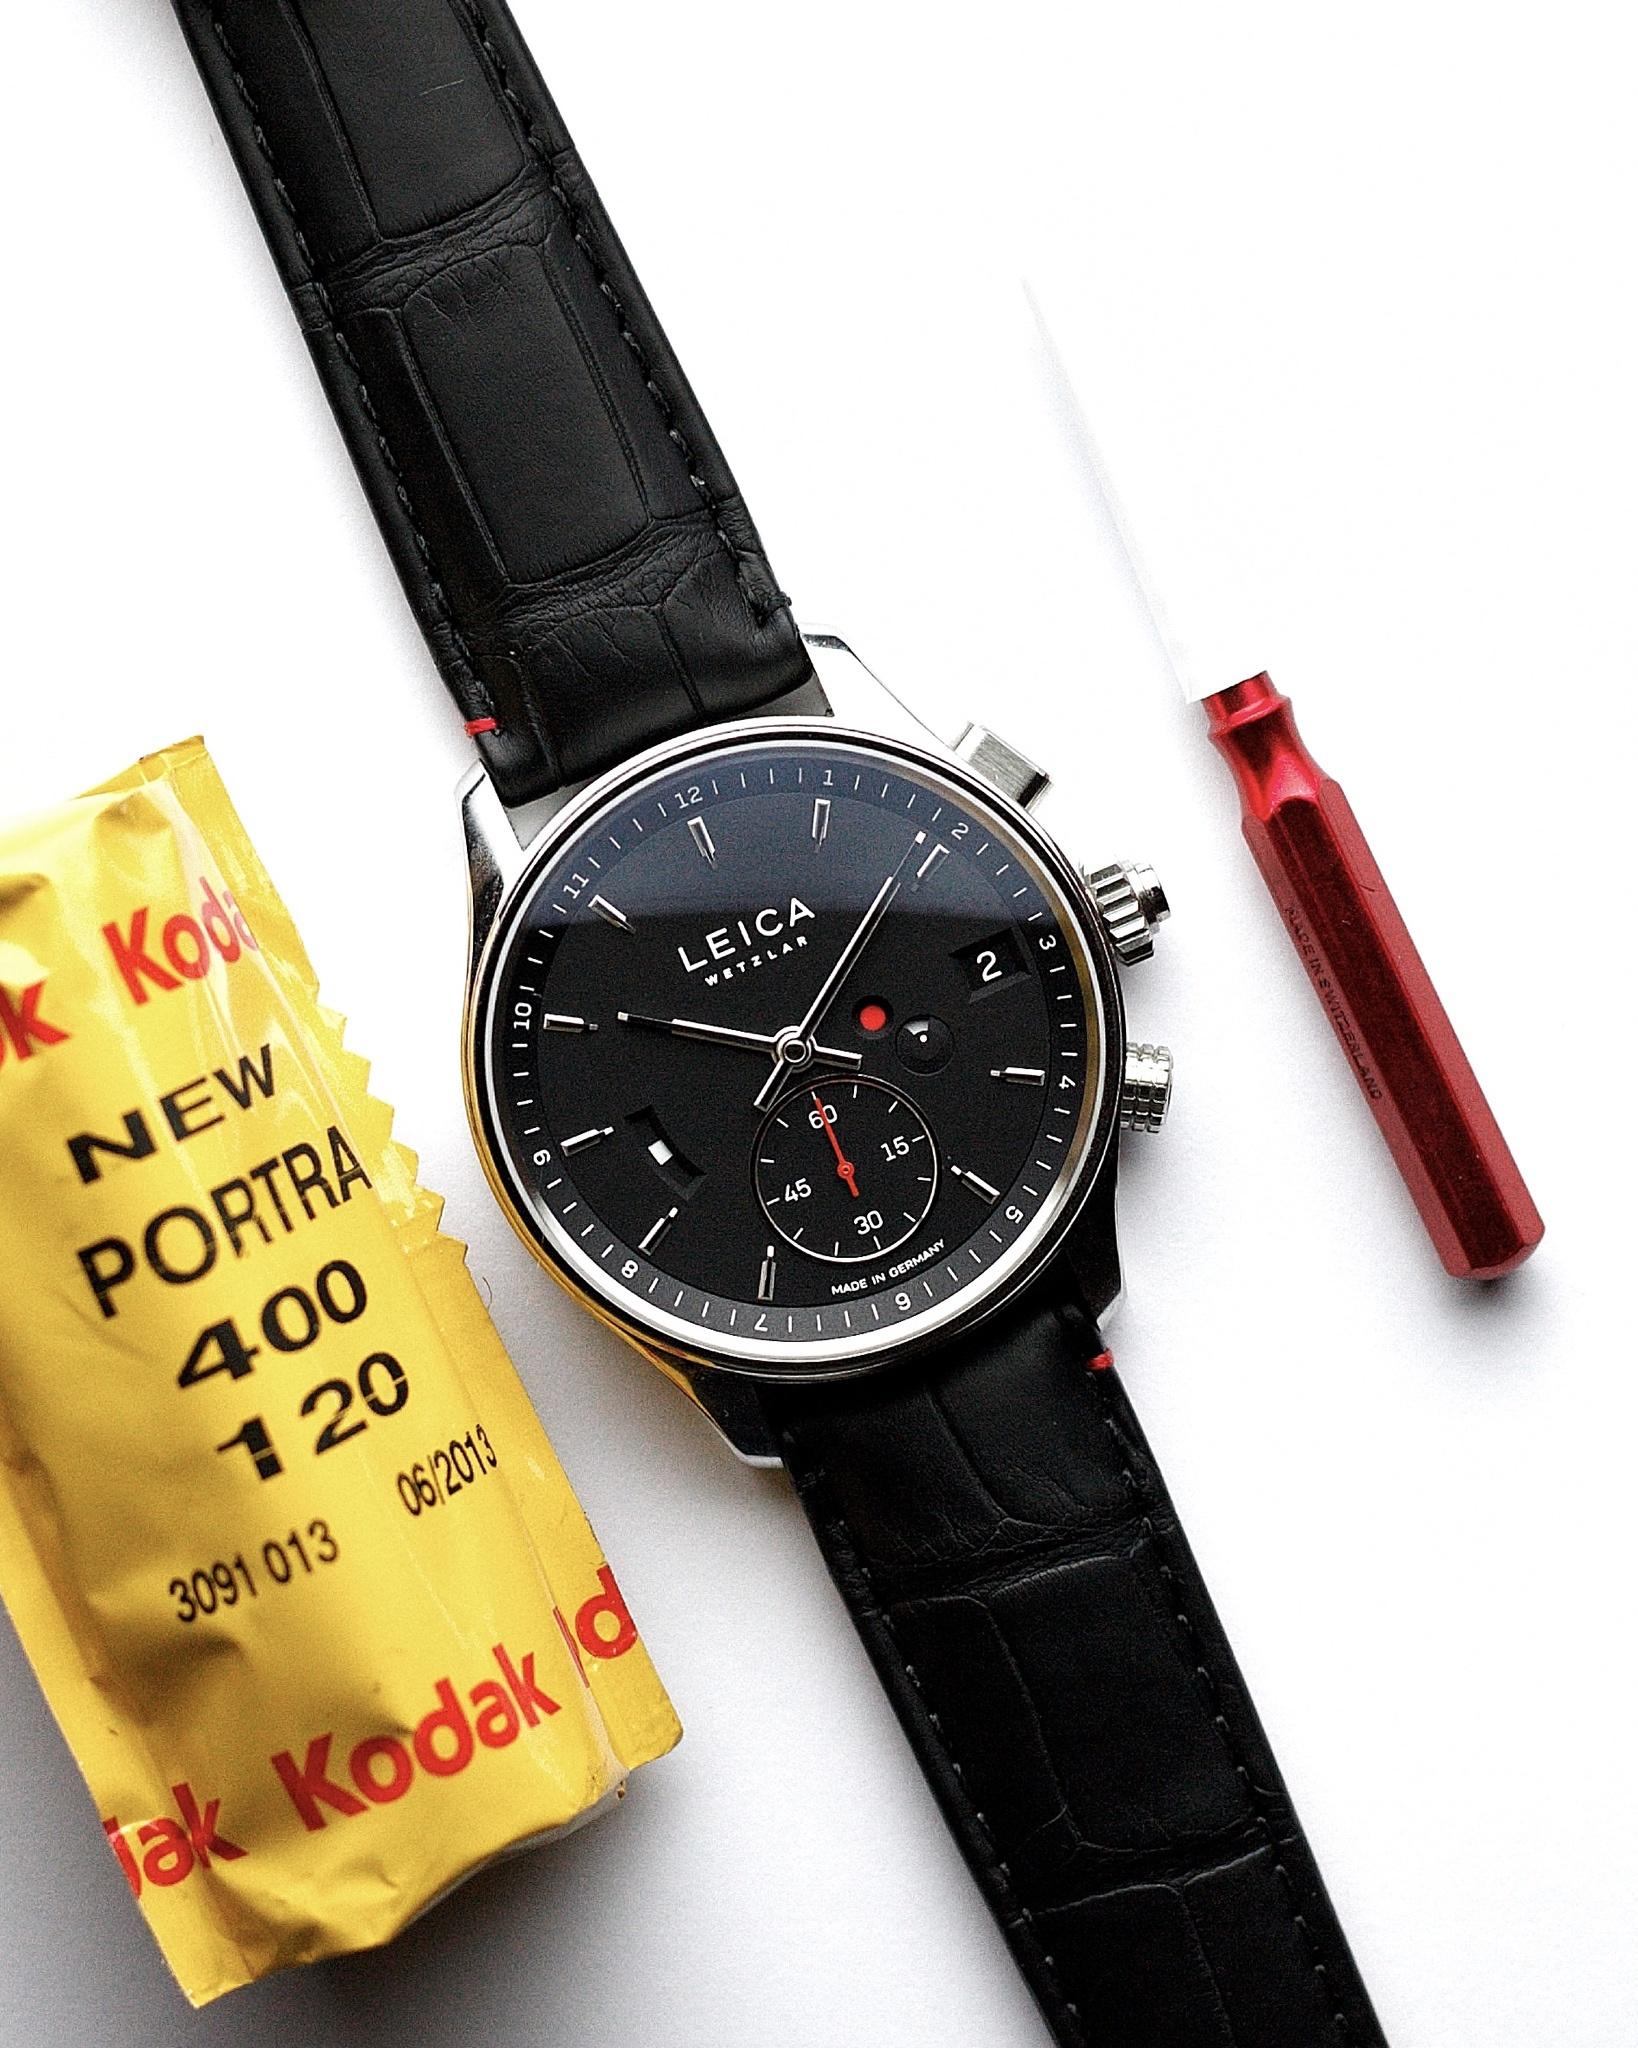 The ZM 11 is a new watch with all the hallmarks of a Leica camera | Stuff